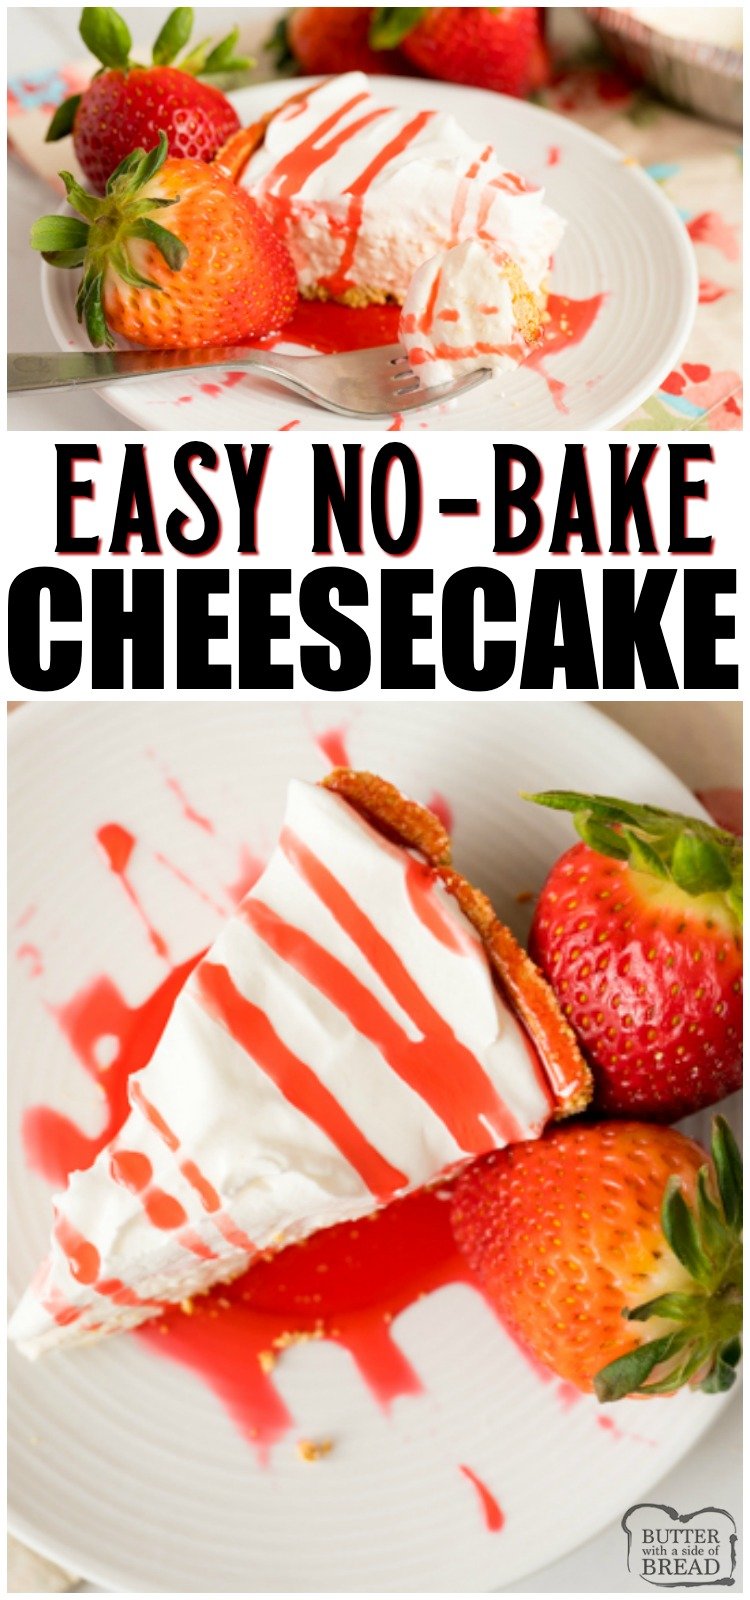 Easy No Bake Cheesecake with Strawberries is an easy 5 ingredient dessert that takes no time to make! Pudding mix, cream cheese and whipped topping make the smooth, no-bake cheesecake filling. Topped with fresh strawberries, it's the perfect Spring dessert. #cheesecake #dessert #easyrecipe #recipe #strawberries from BUTTER WITH A SIDE OF BREAD